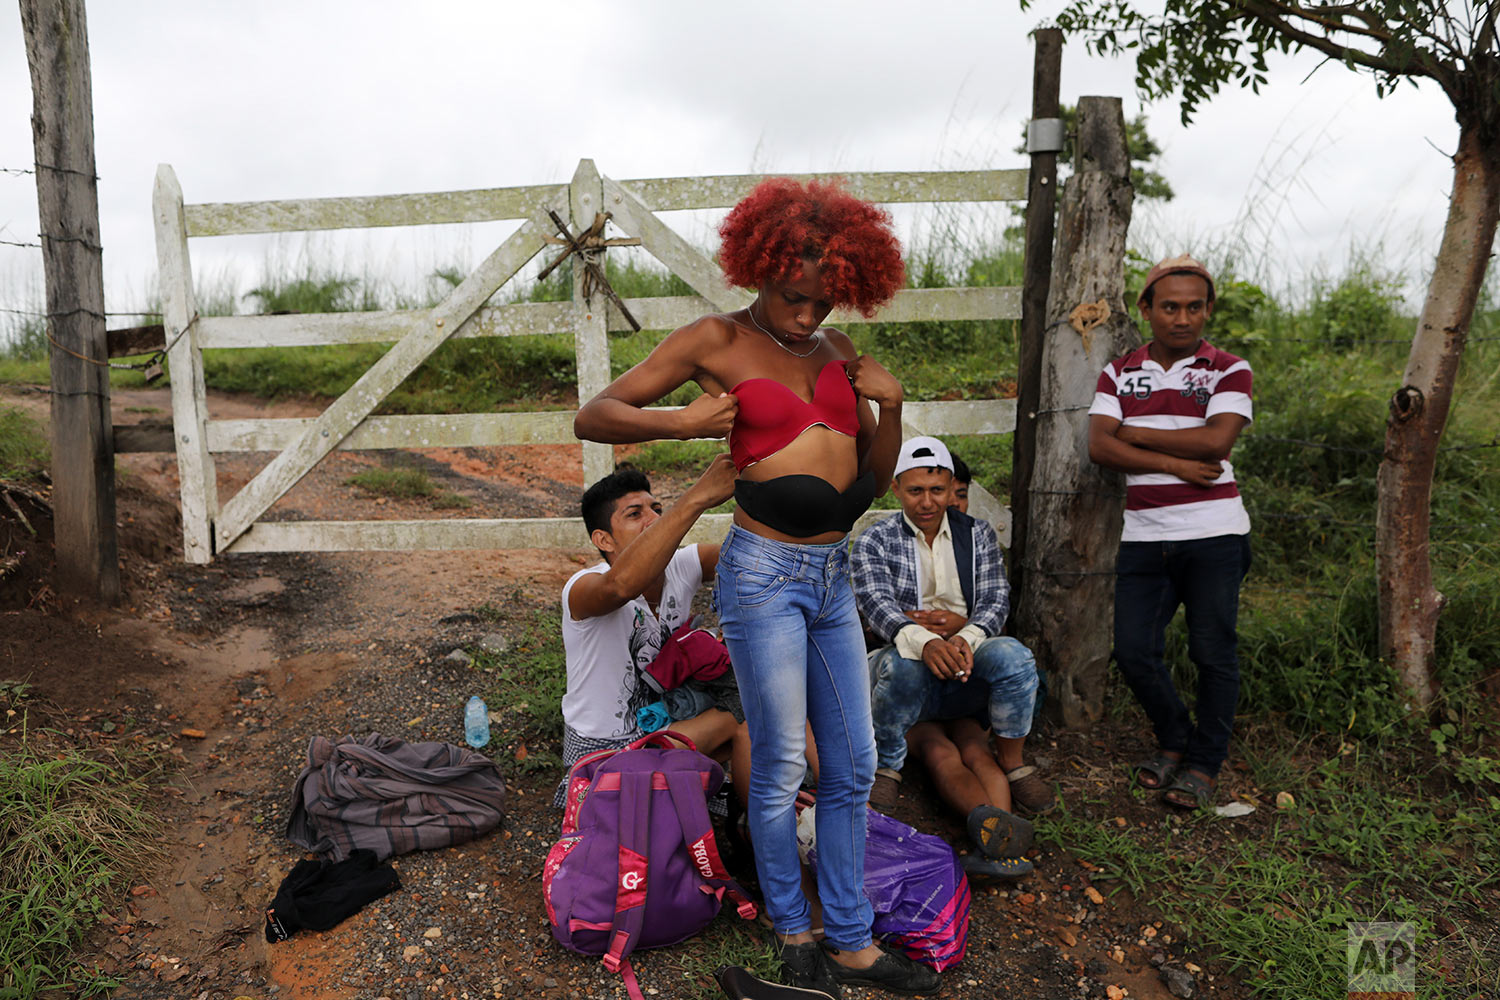  In this Nov. 3, 2018 photo, Honduran transgender Alexa Amaya, who is traveling with the migrant caravan hoping to reach the U.S. border, tries on a pushup bra she selected from a pile of donated clothing left alongside the road to Sayula, Mexico. (A